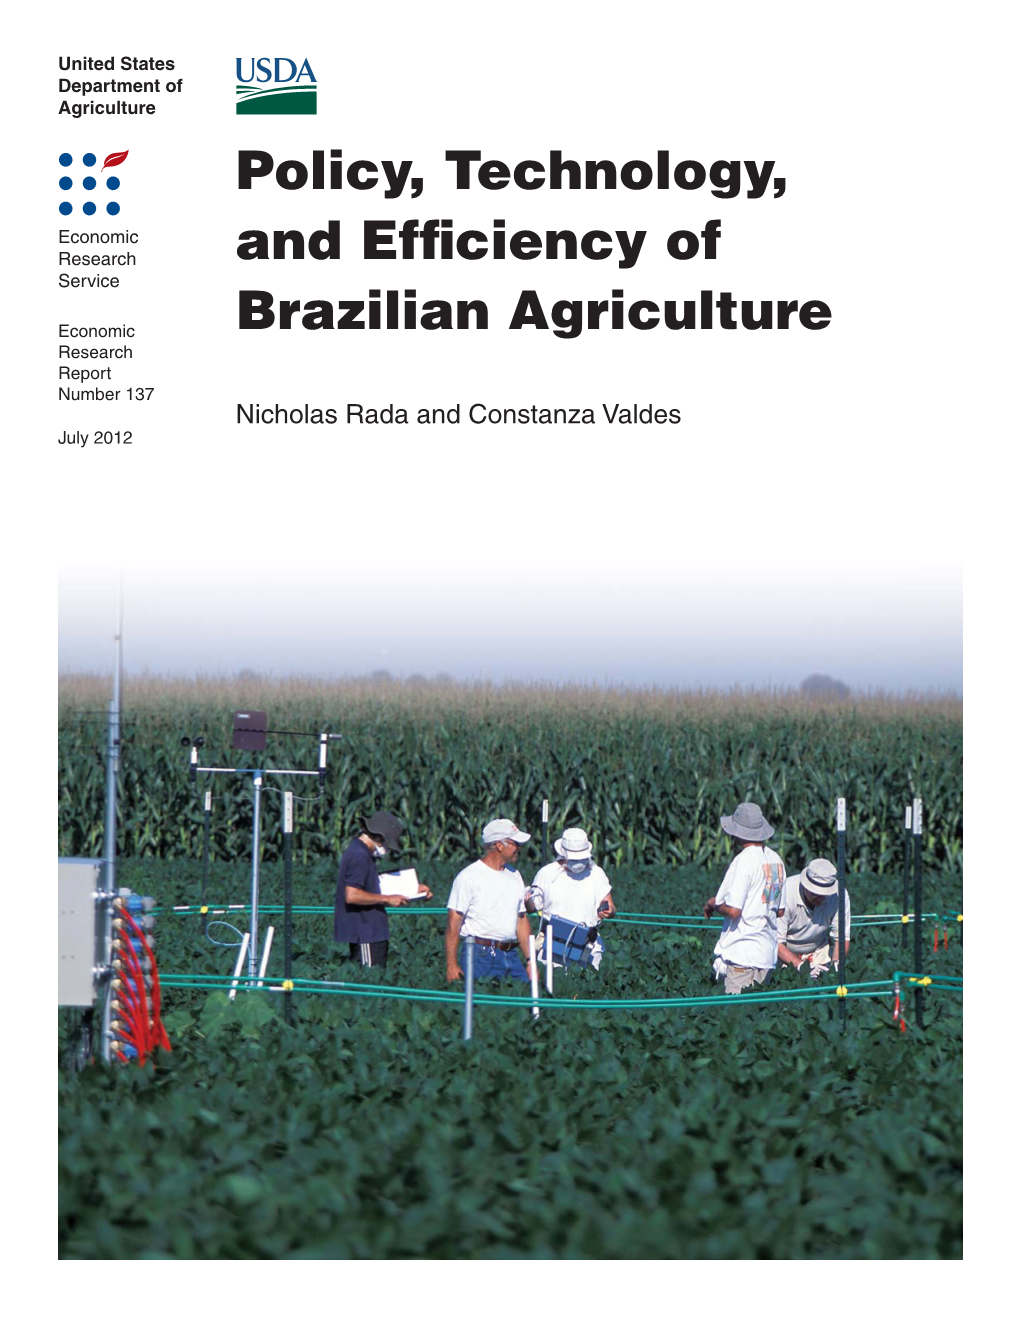 Policy, Technology, and Efficiency of Brazilian Agriculture, ERR-137, U.S